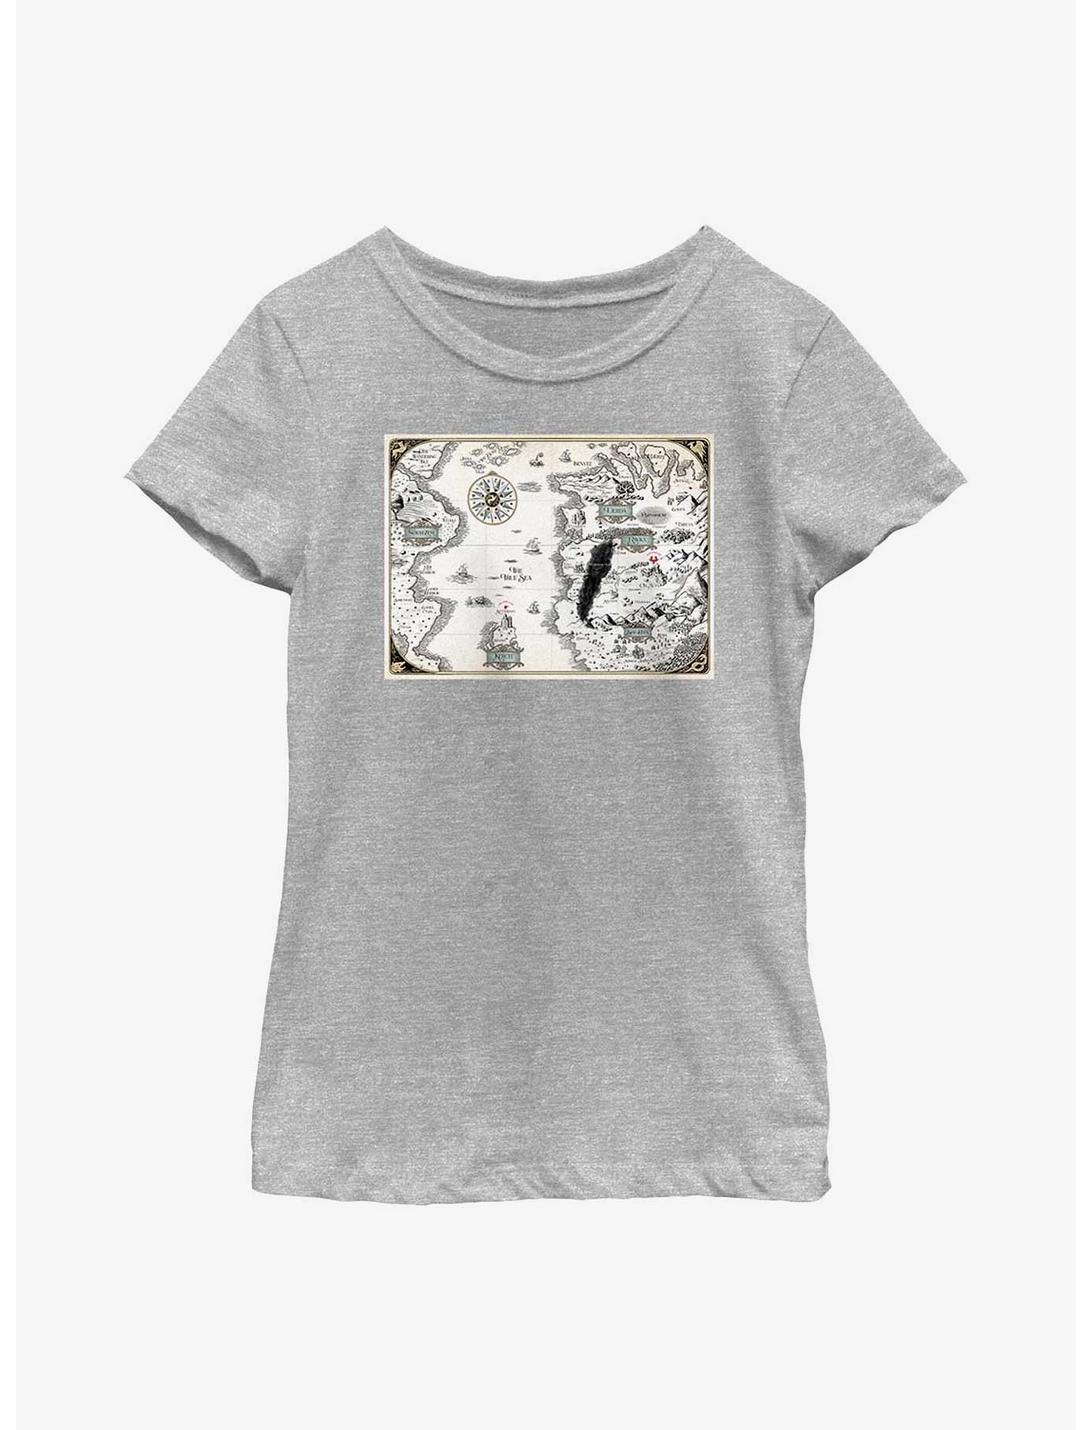 Shadow And Bone Map Youth Girls T-Shirt, ATH HTR, hi-res